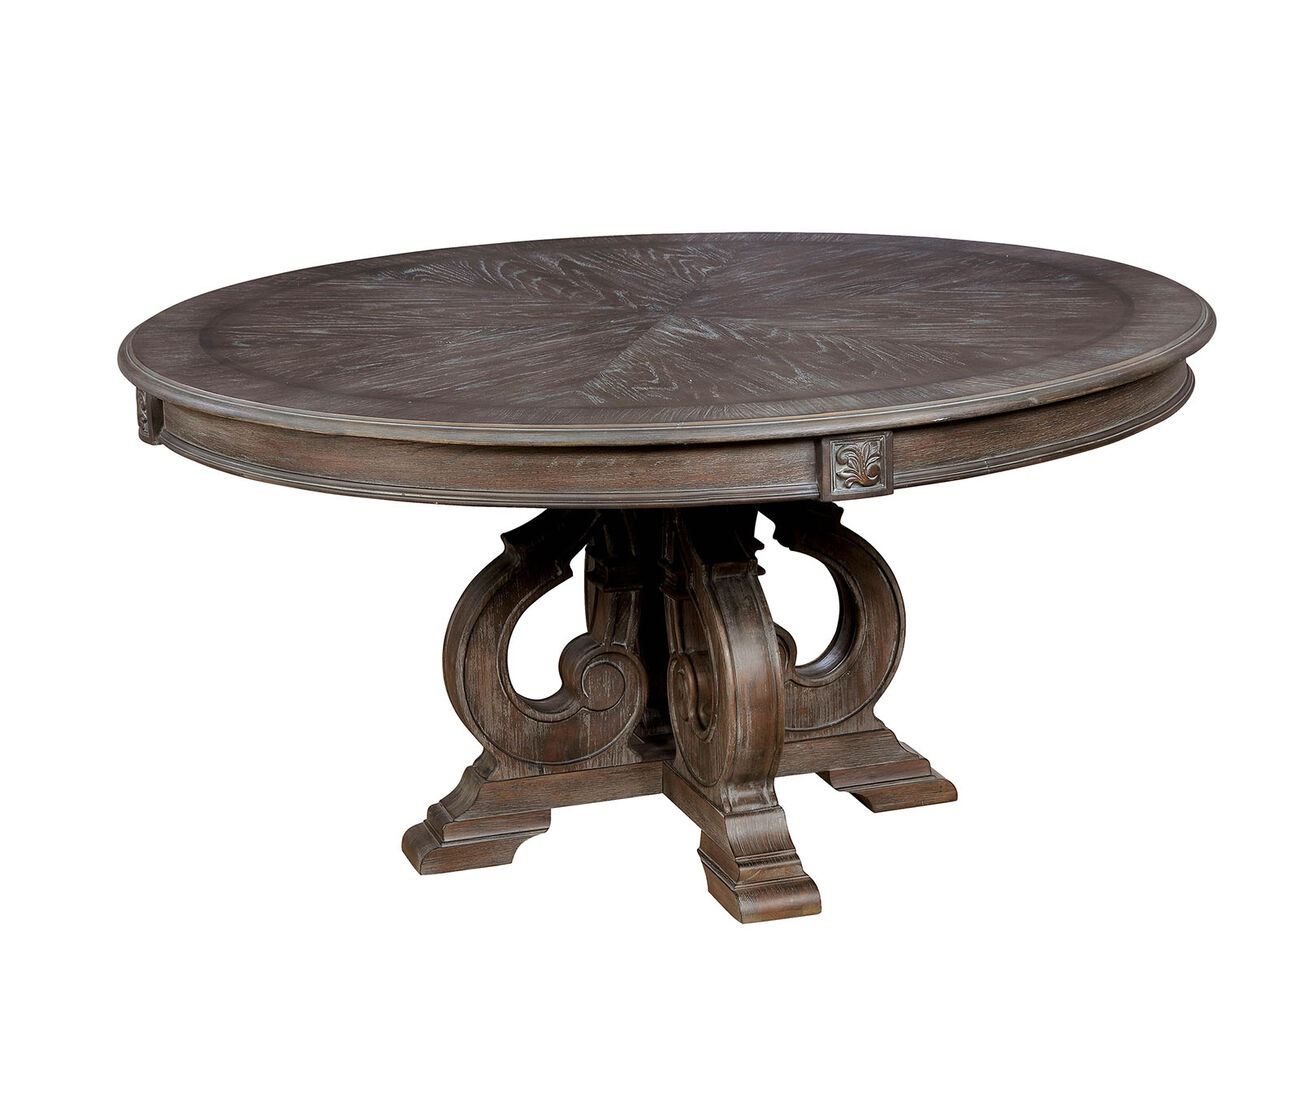 Solid Wood Round Dining Table with Pedestal Base, Rustic Brown